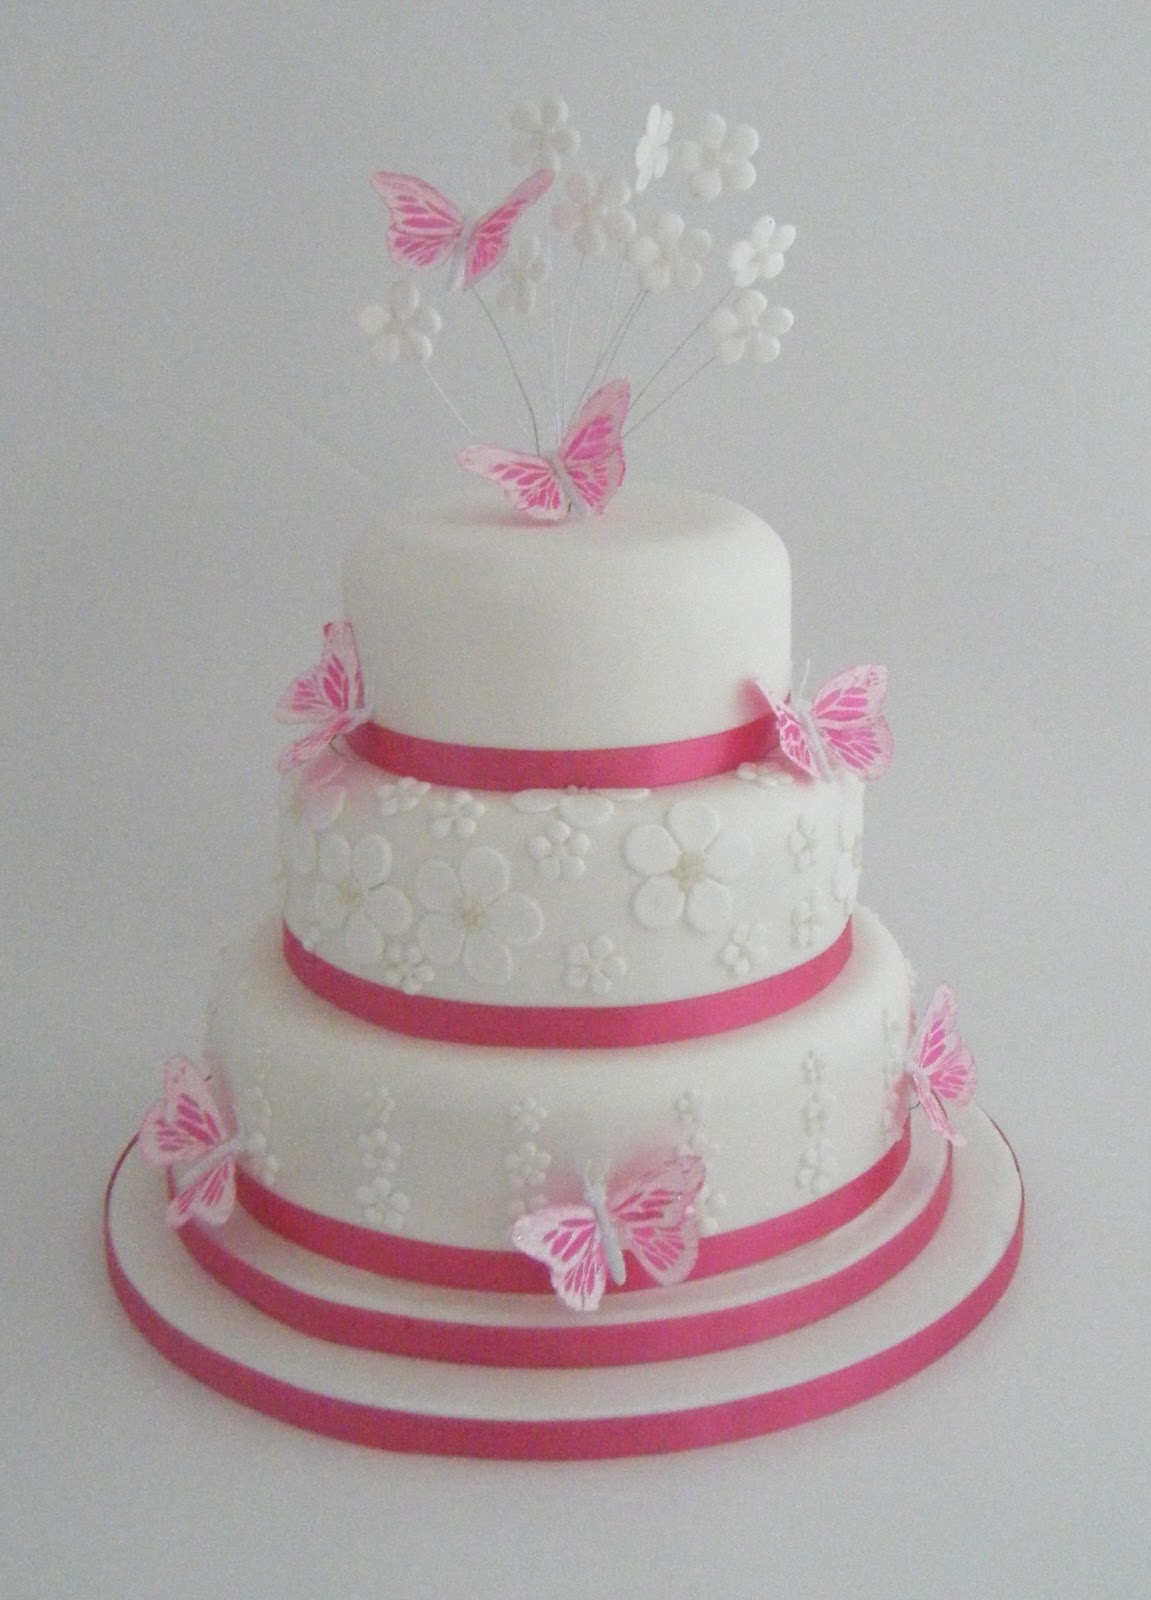  Wedding  Cakes  Top 10 Butterfly Wedding  Cake  Decorations  